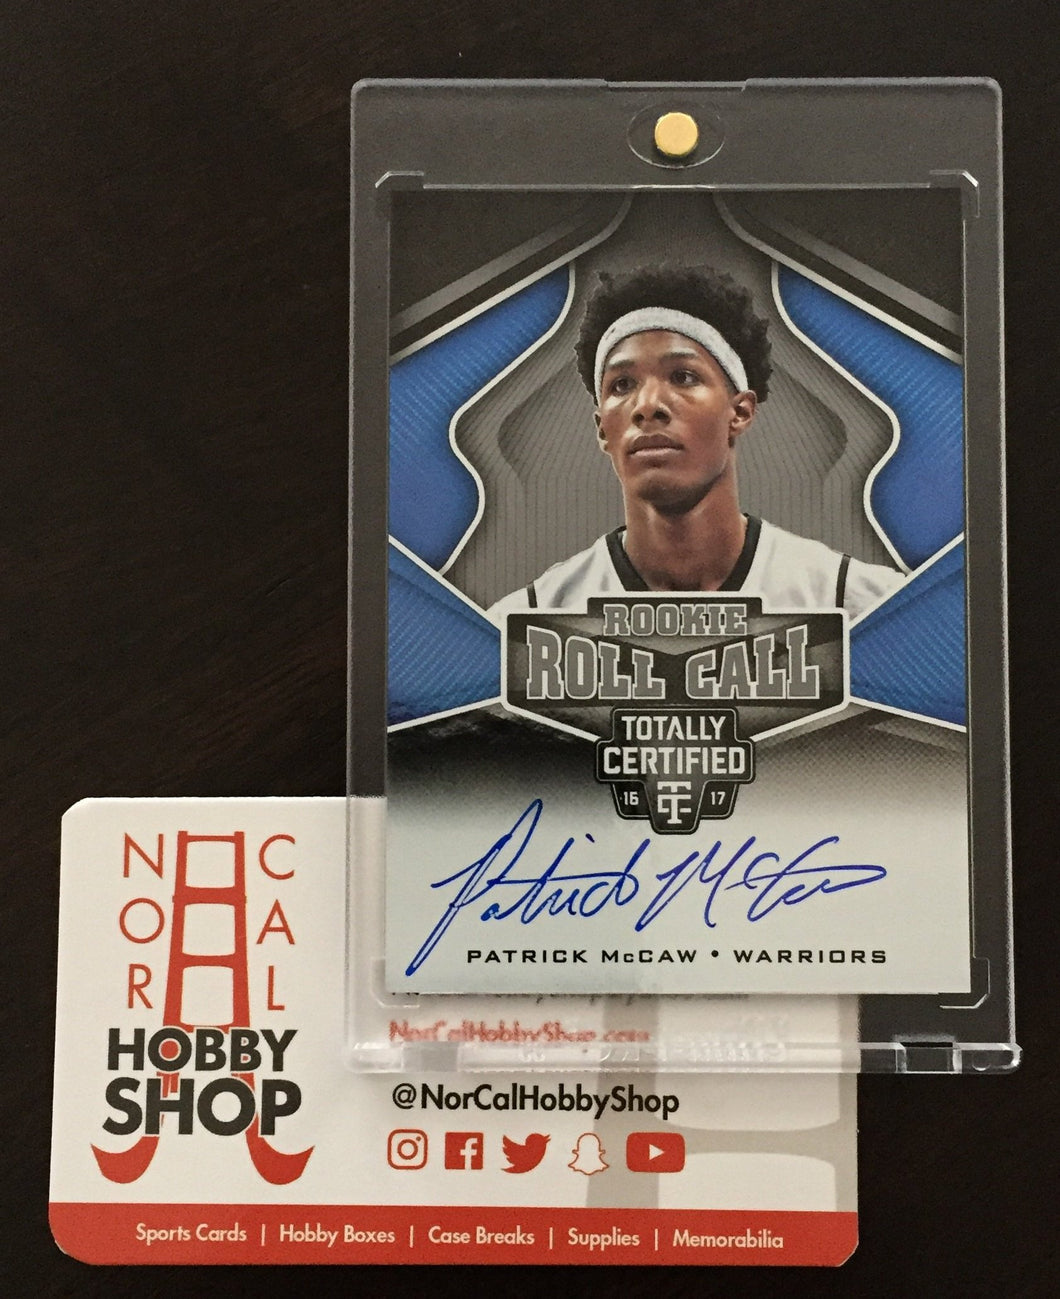 2016/17 Totally Certified Patrick McCaw Rookie Roll Call Autograph - Golden State Warriors